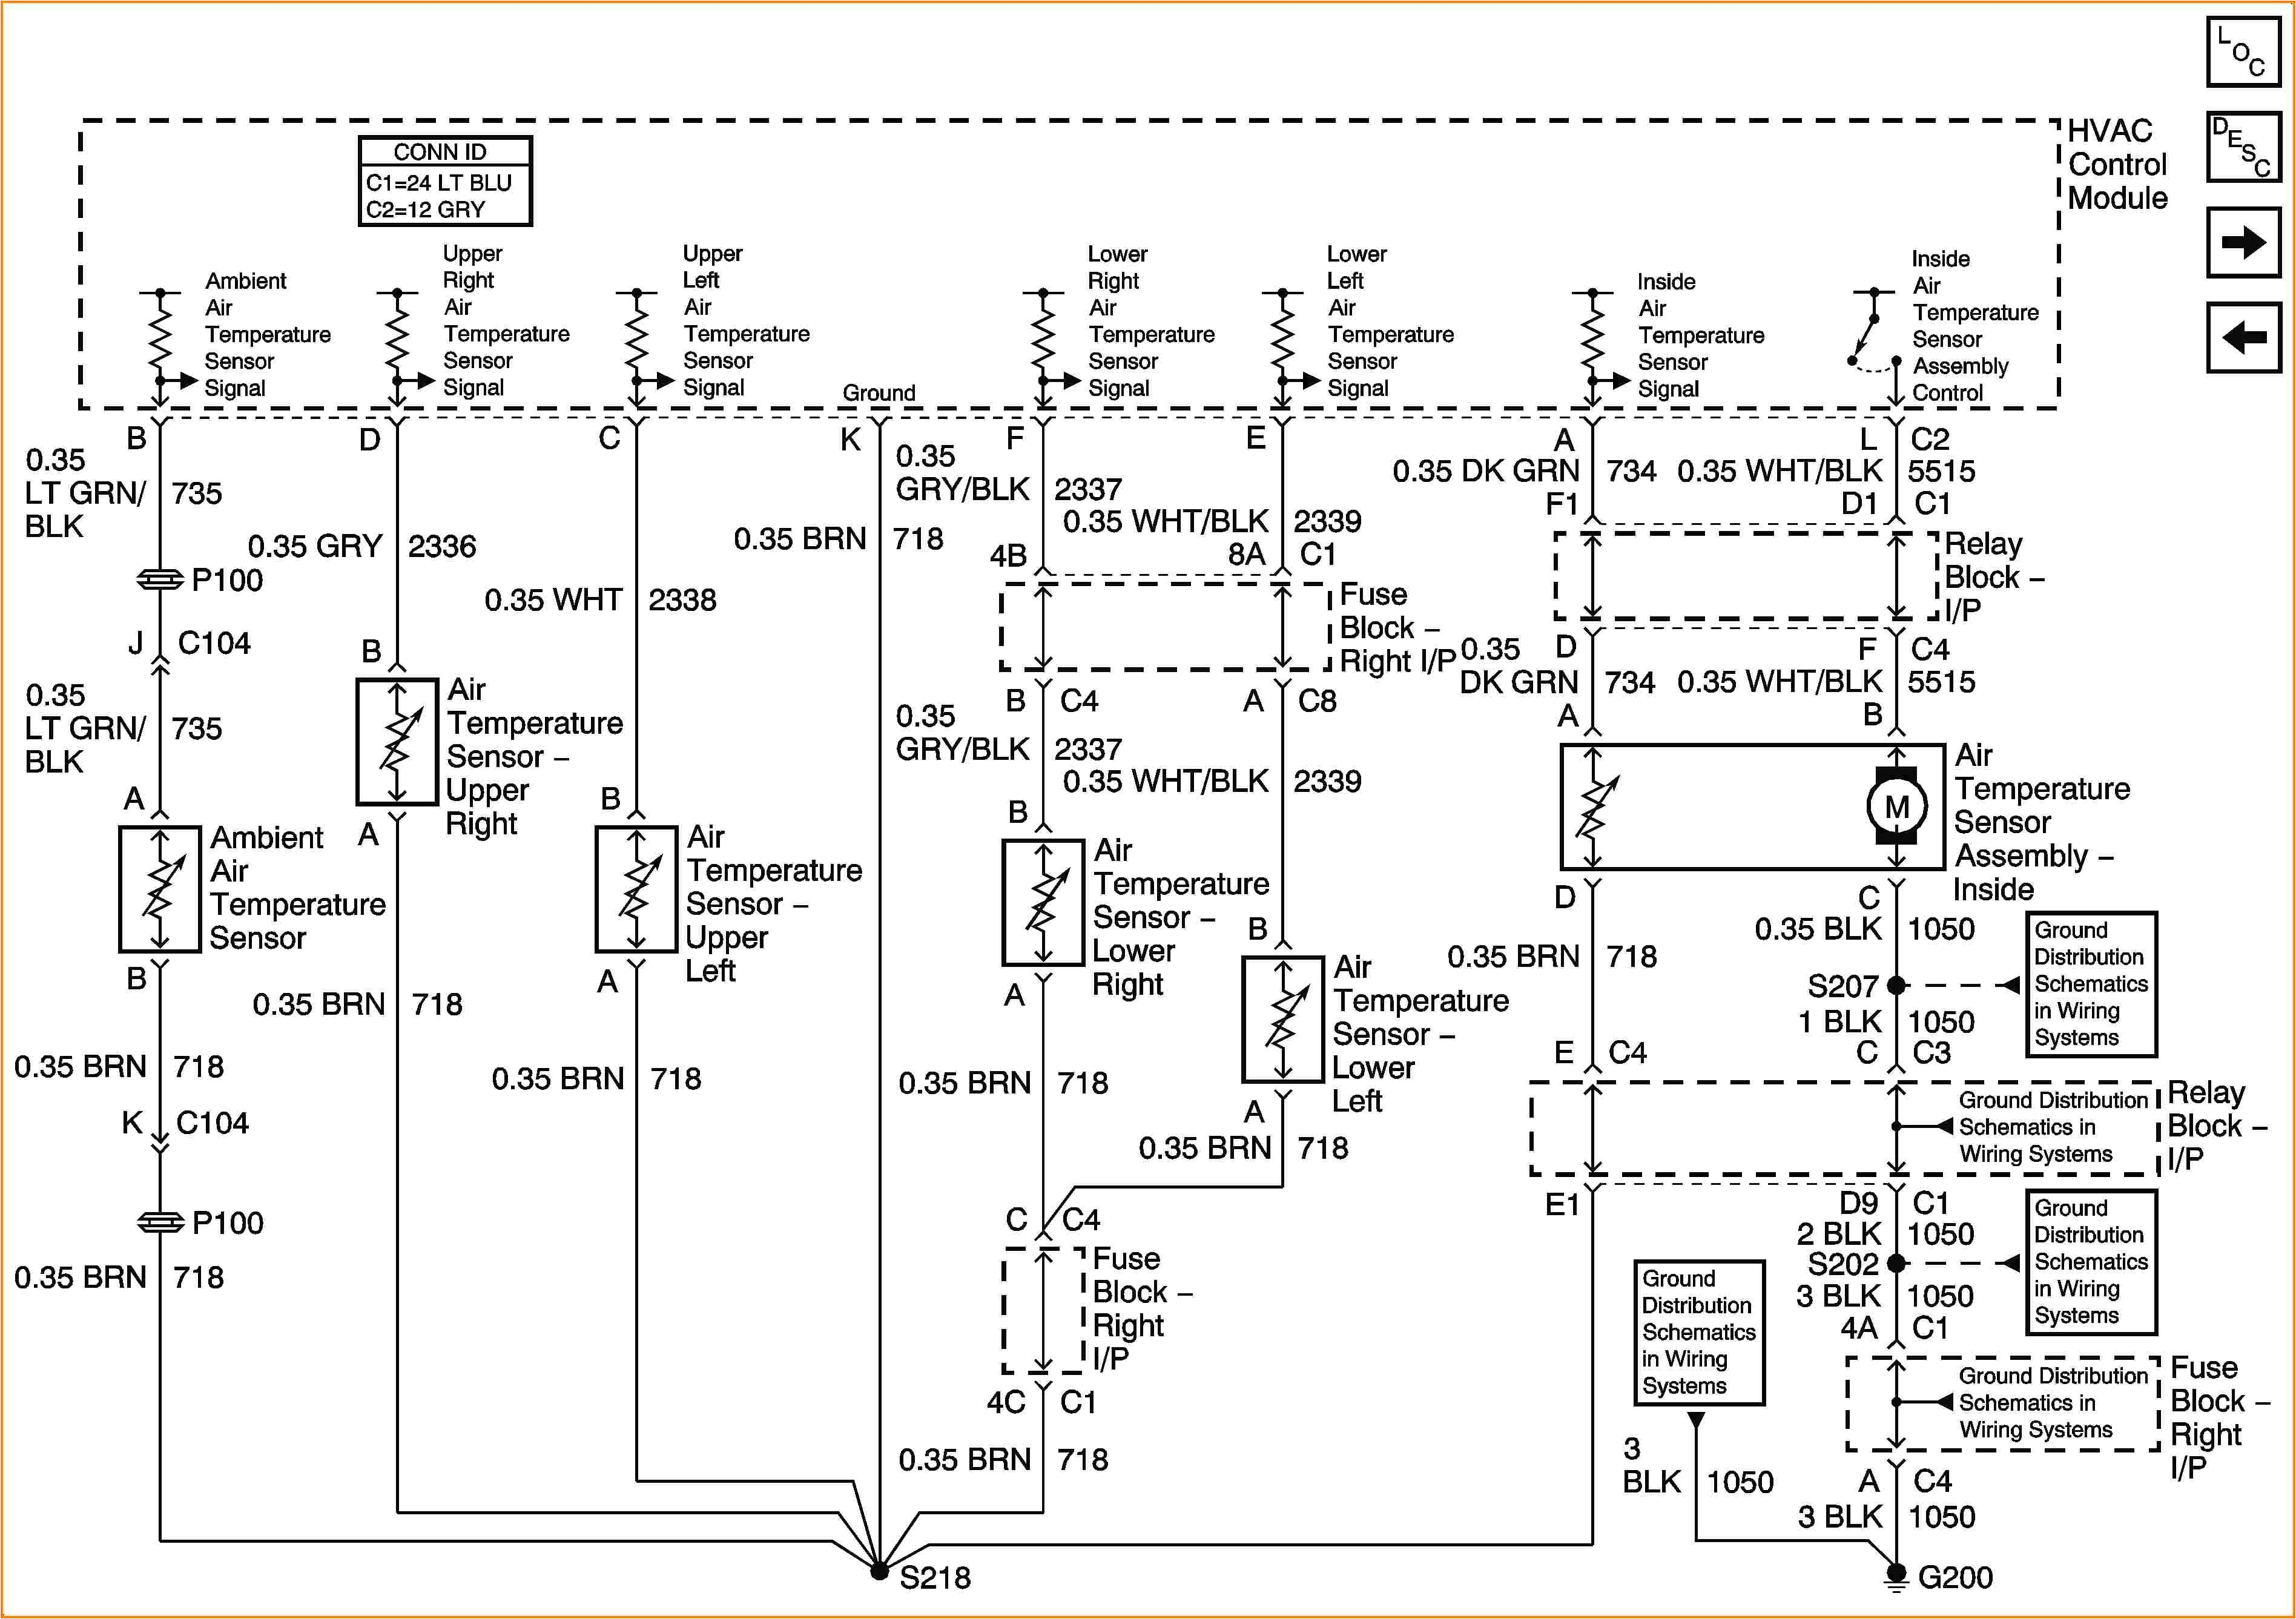 wiring diagrams 2003 chevy 1500hd wiring diagrams posts wiring diagram 2003 chevy silverado 1500 wiring diagram